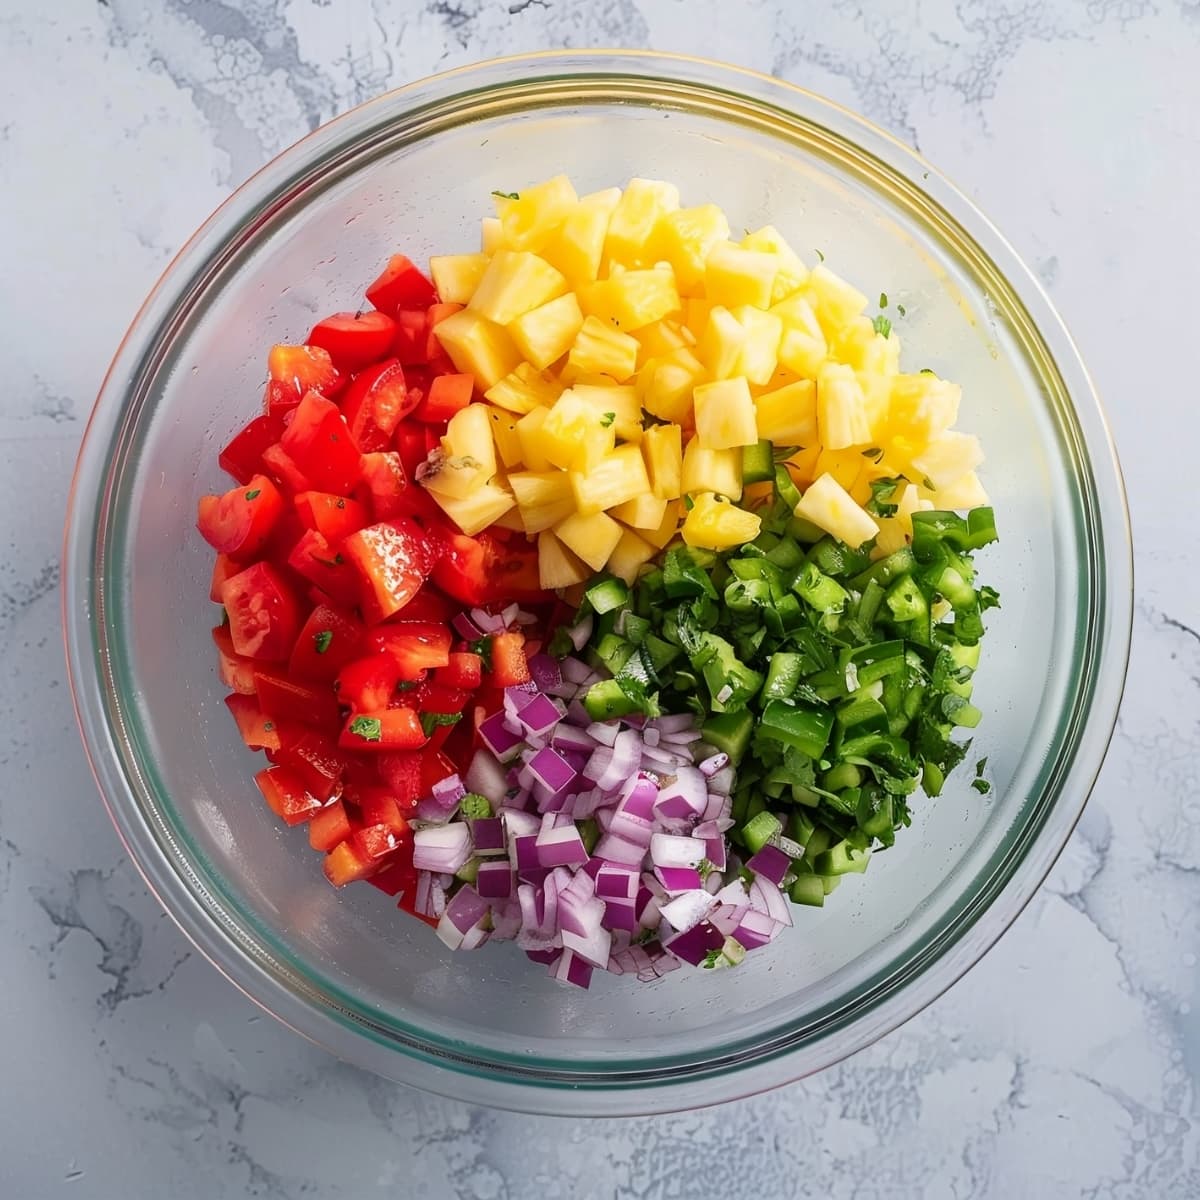 Ingredients for pineapple salsa including tomatoes, onions and jalapenos